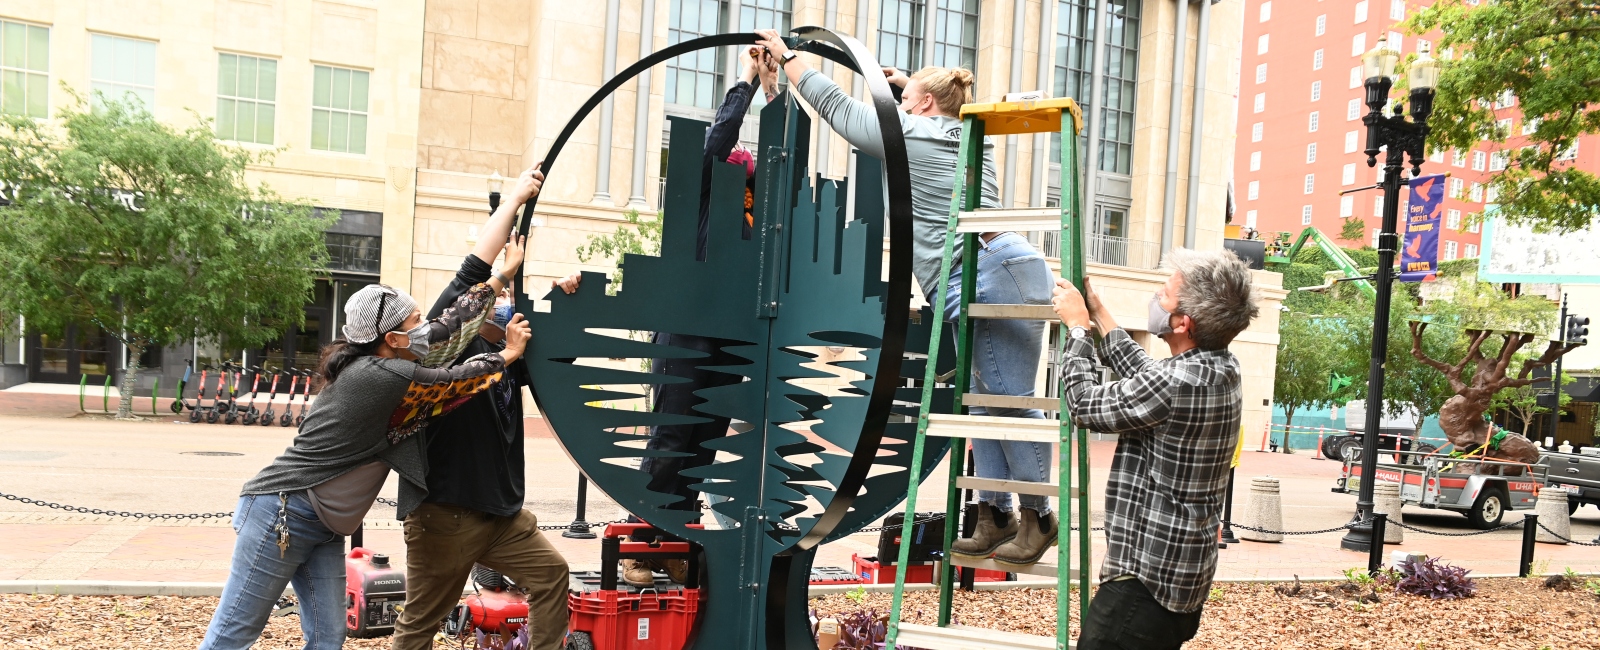 Art faculty, staff and student working on setting up art sculpture in Hemming Plaza